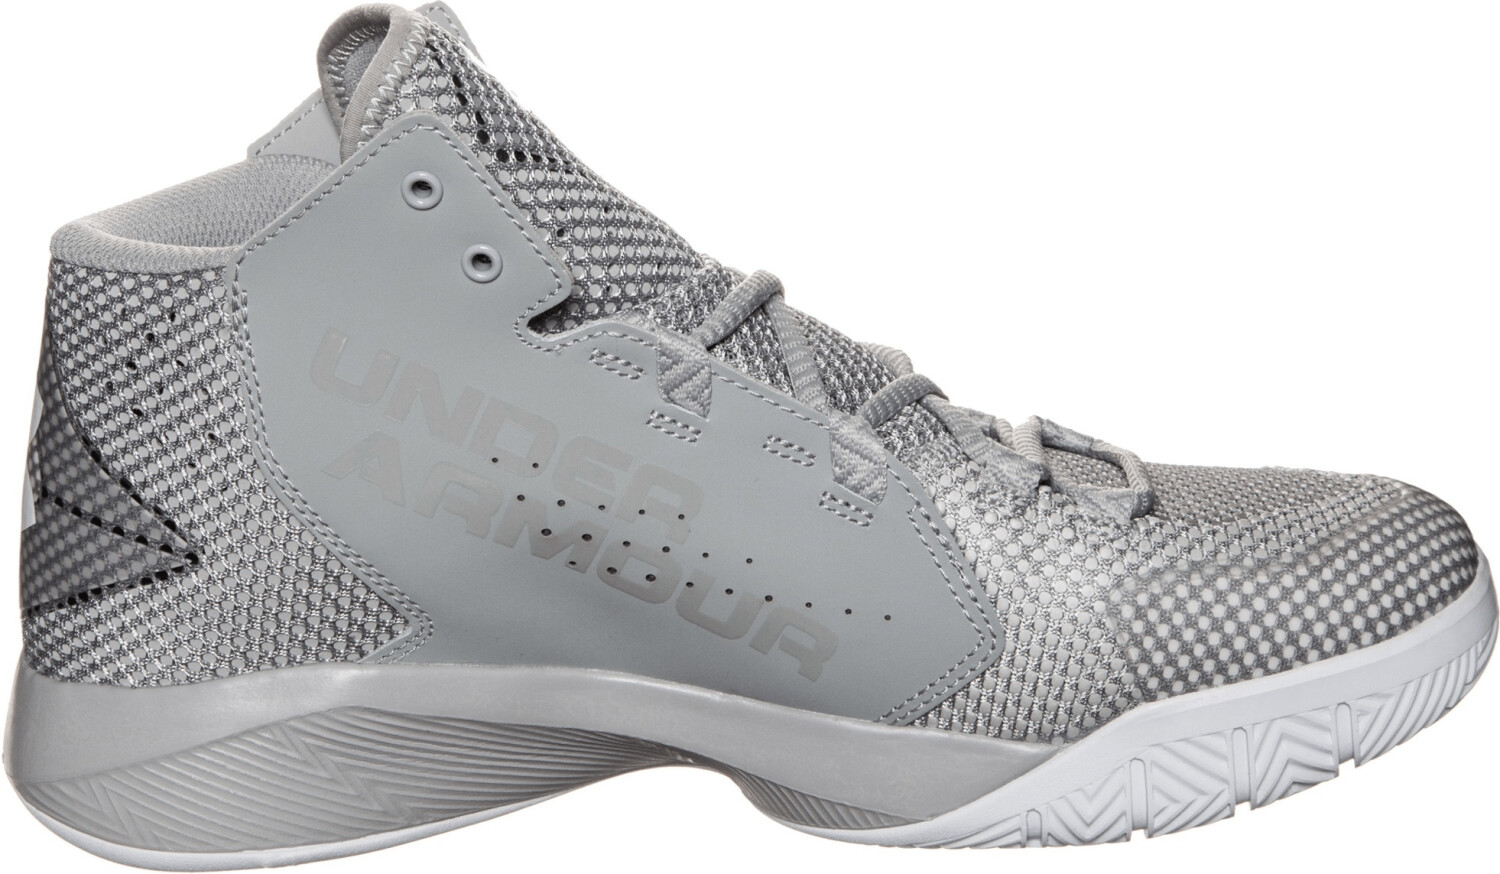 Under Armour Torch Fade gray wolf